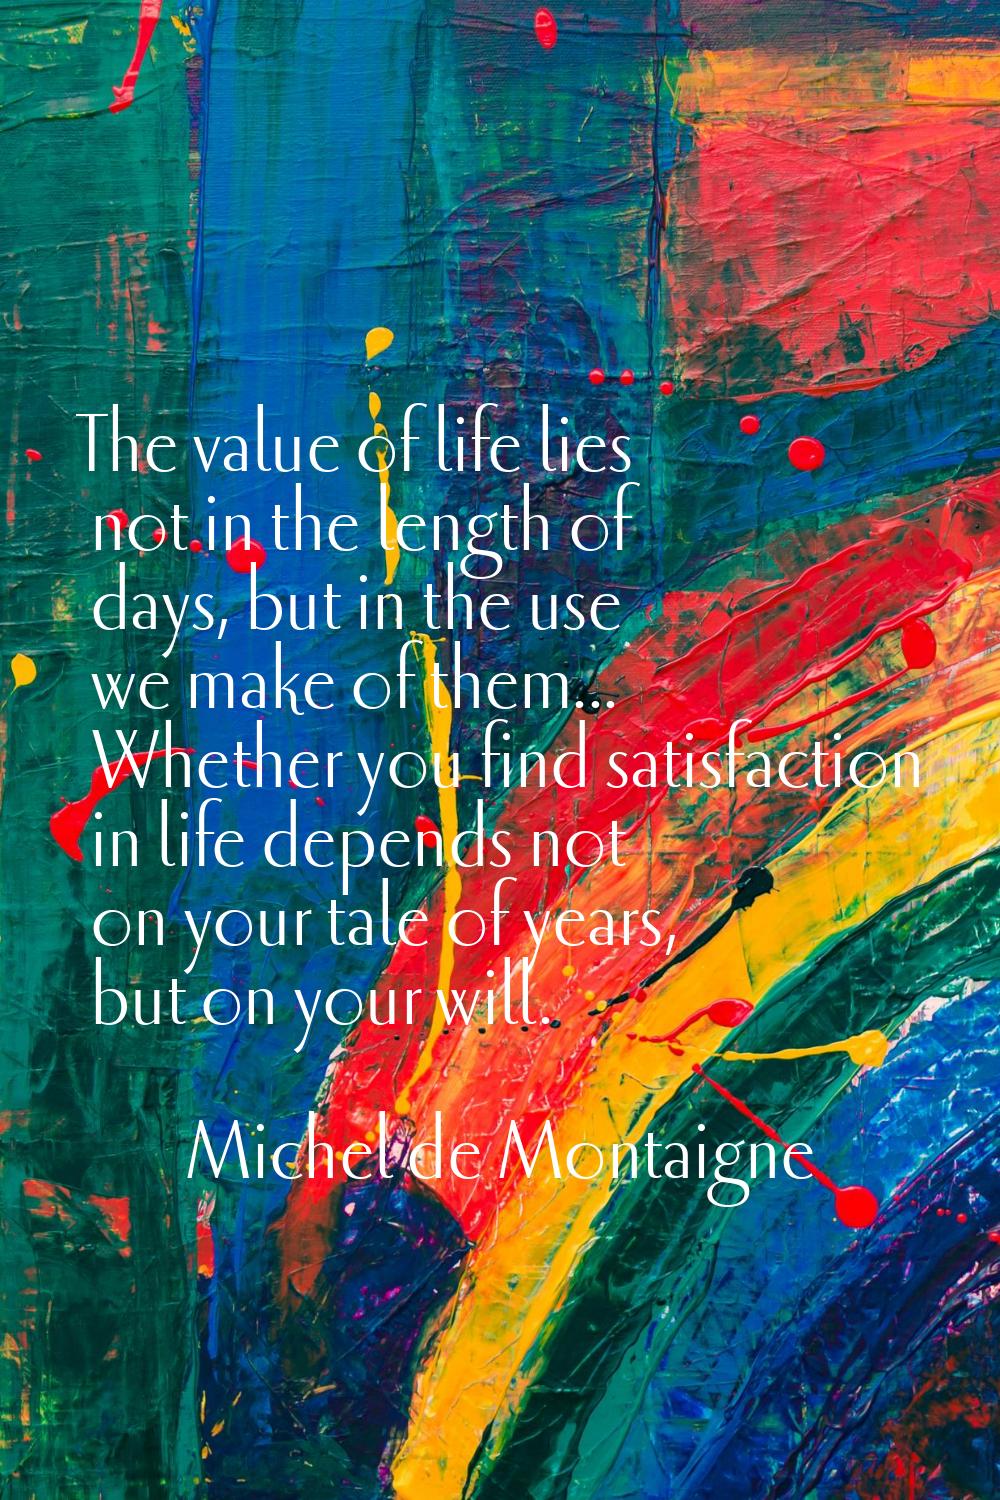 The value of life lies not in the length of days, but in the use we make of them... Whether you fin